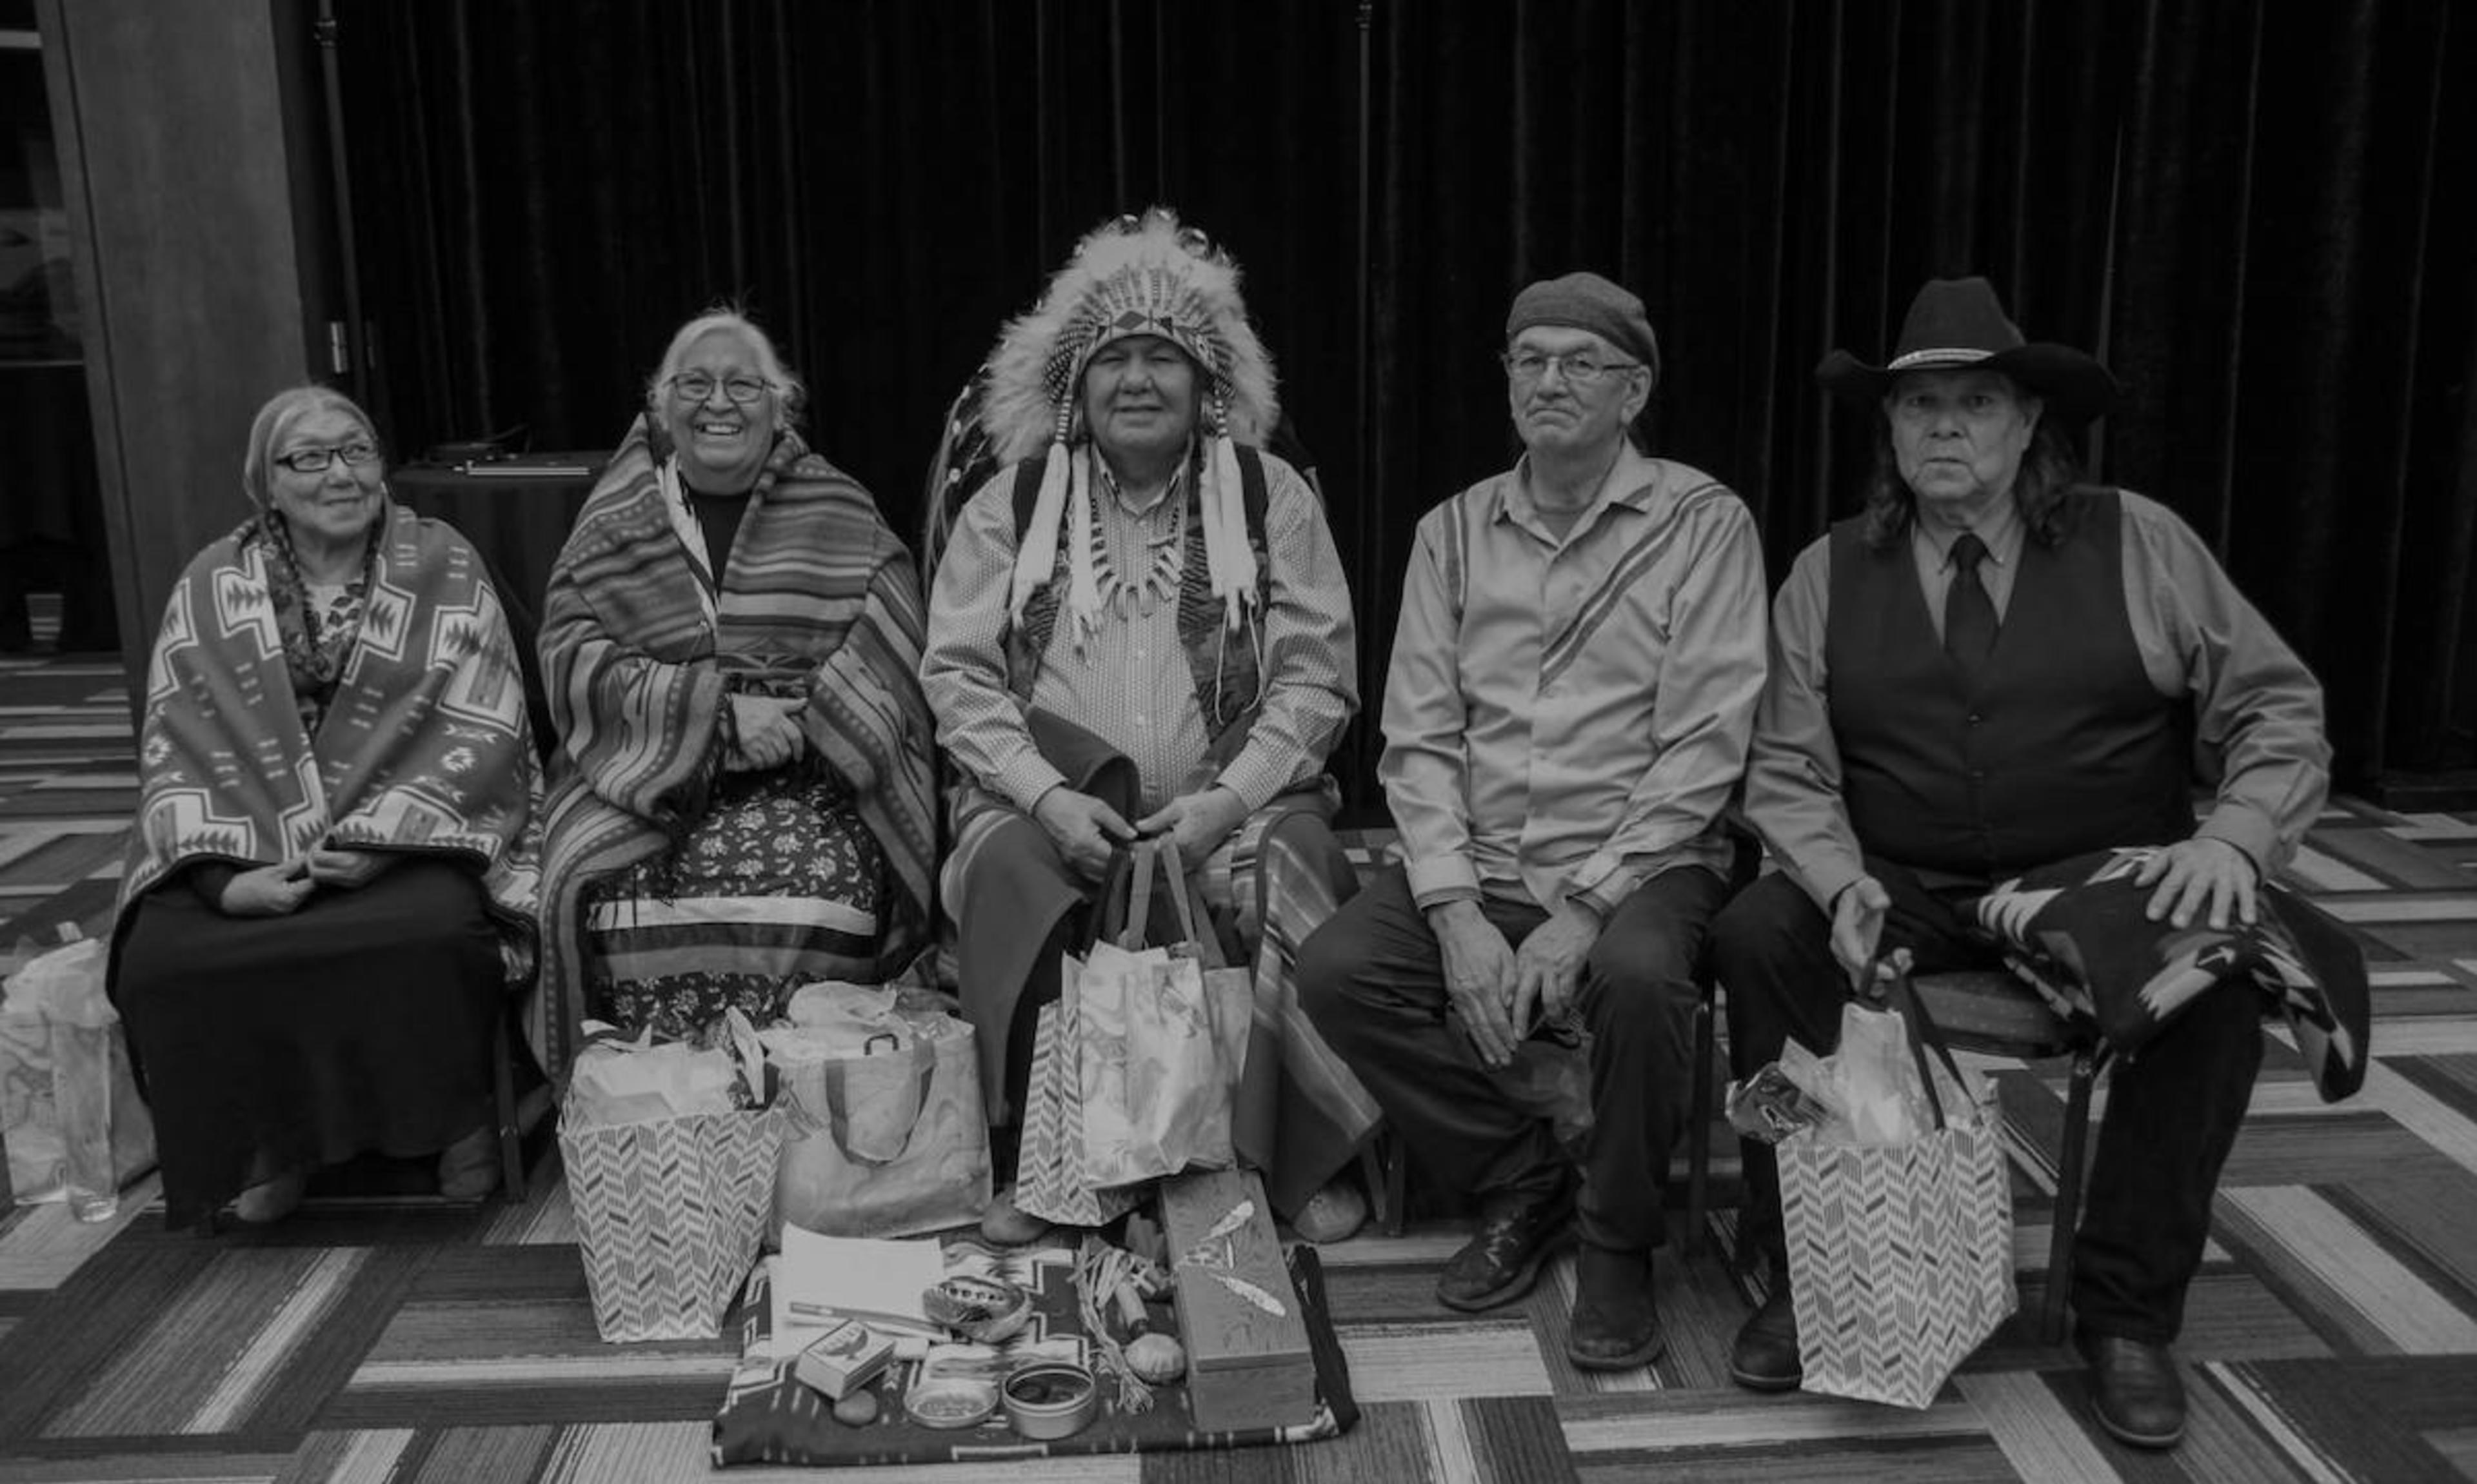 Indigenous Elders pose for a photo with shopping bags.